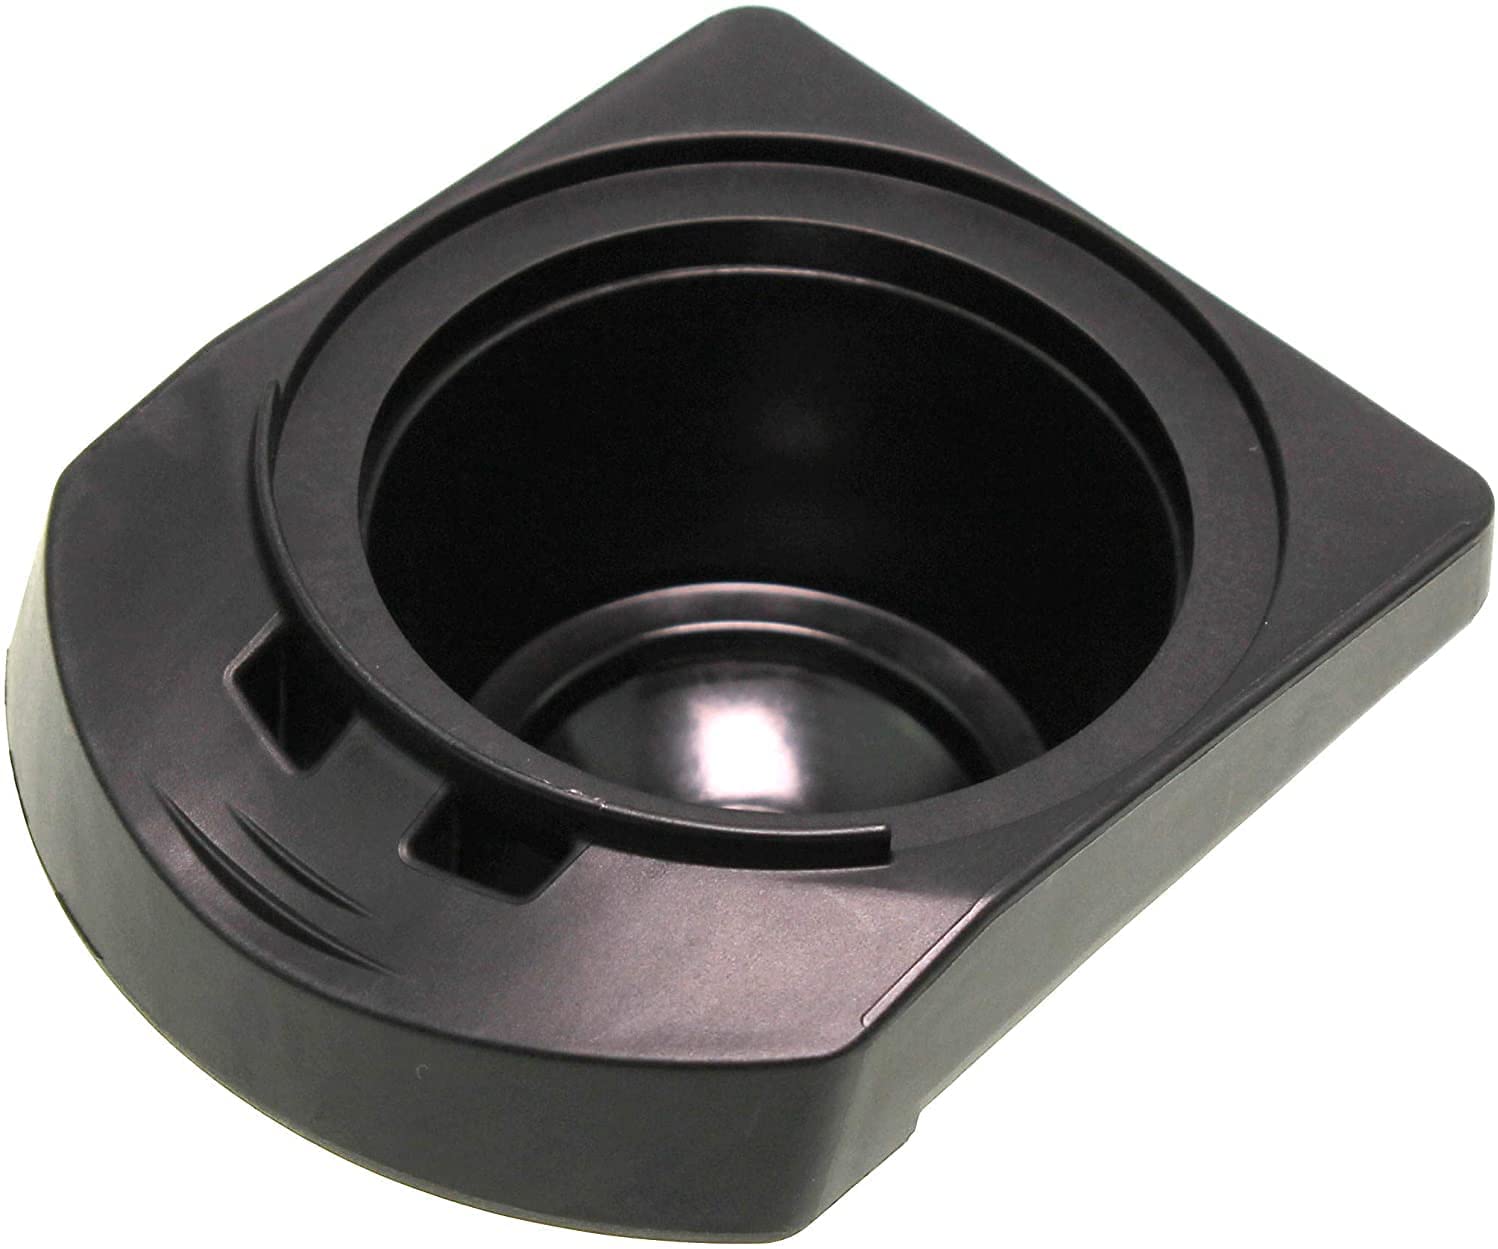 WI1786 Capsule Holder Compatible with DeLonghi EDG260 Infinissima Dolce Gusto